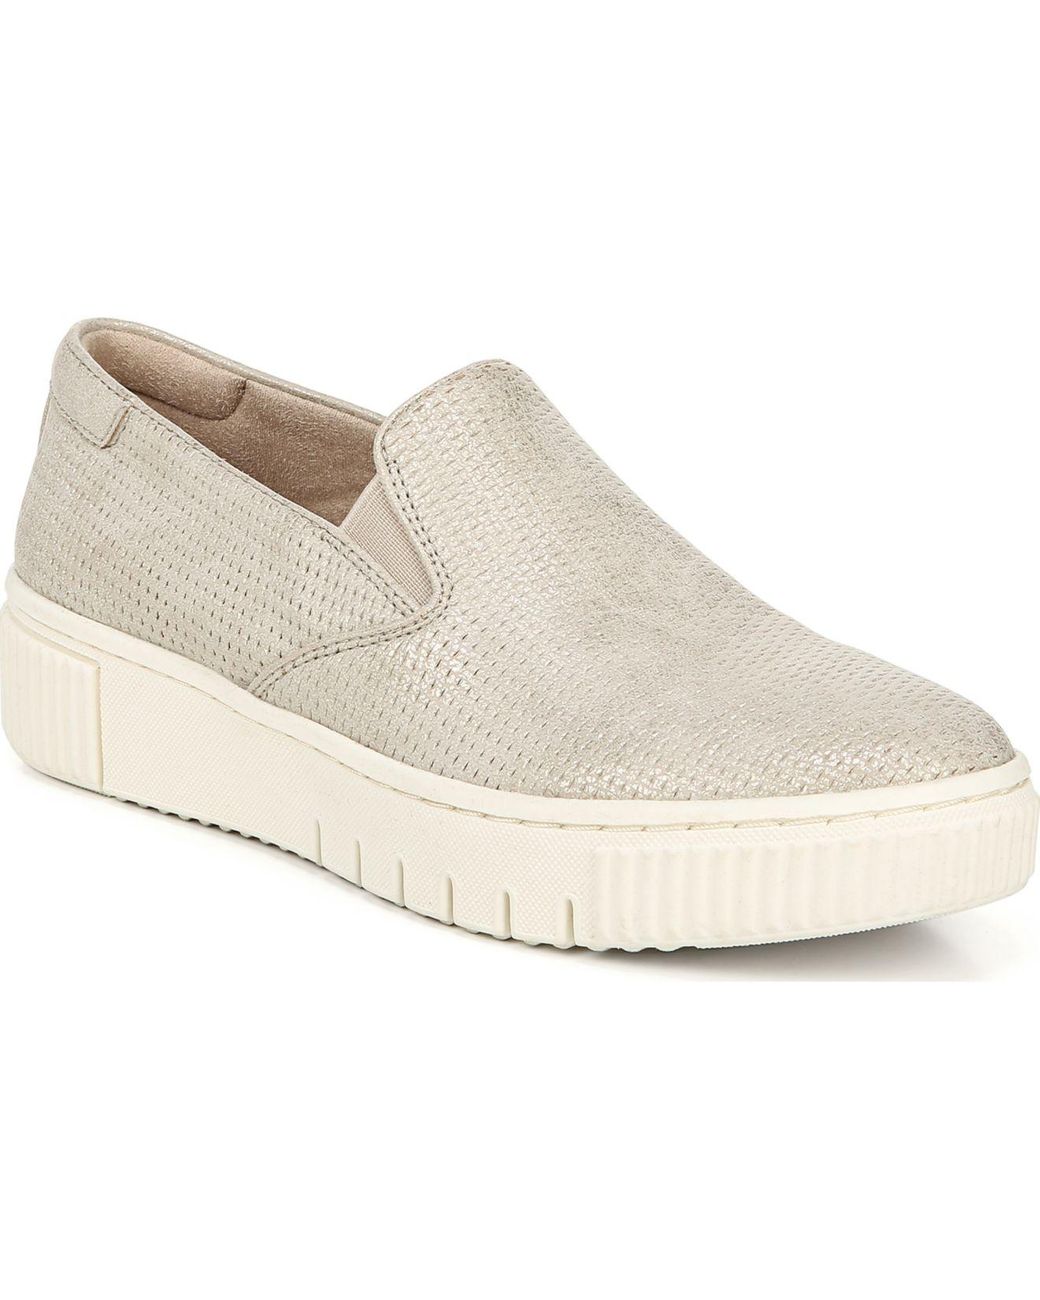 SOUL Naturalizer Synthetic Tia Slip-on Sneakers - Lyst